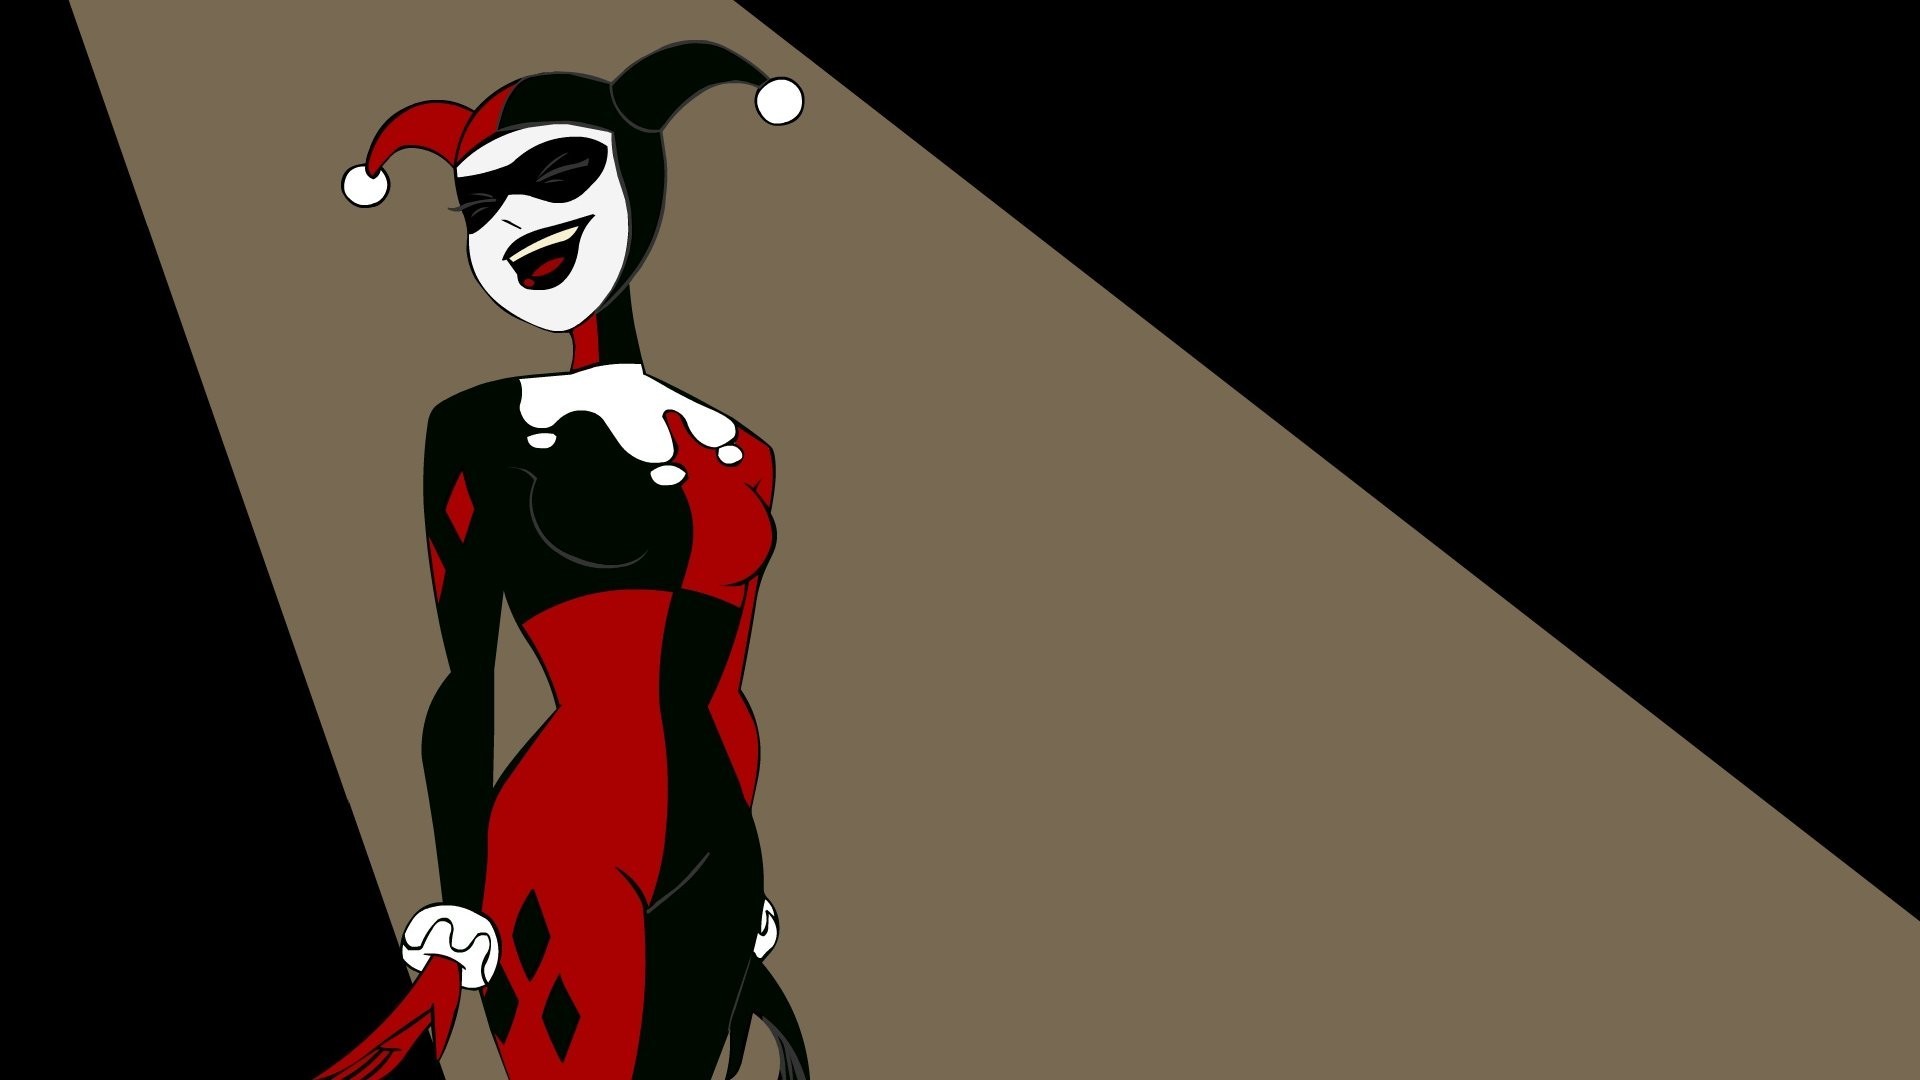 Harley Quinn Costume HD Wallpaper with image resolution 1920x1080 pixel. You can make this wallpaper for your Desktop Computer Backgrounds, Mac Wallpapers, Android Lock screen or iPhone Screensavers